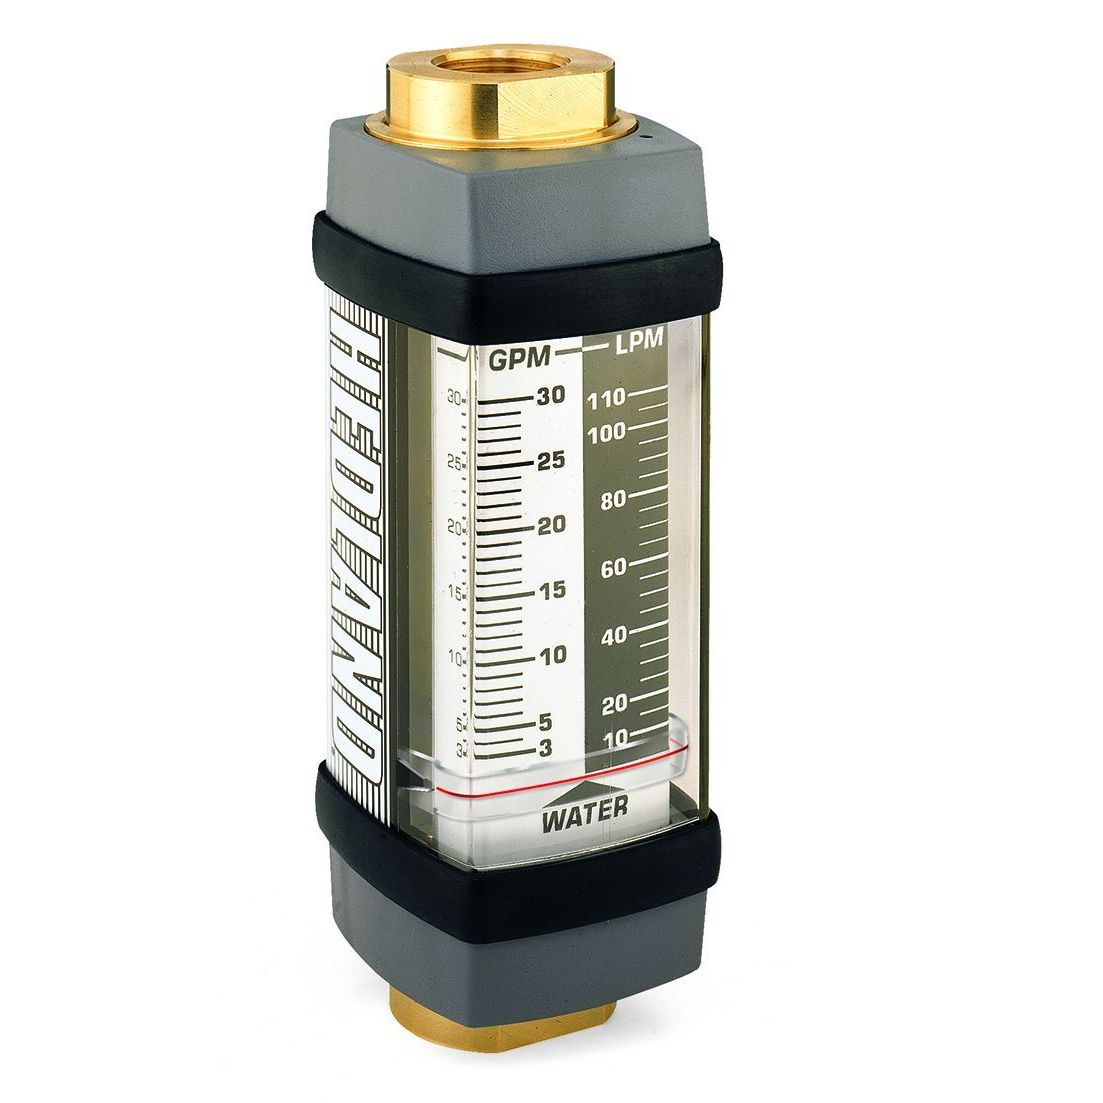 H855B-050 : Hedland 3500psi Brass Flow Meter for Water, 1.25 NPT, 5 to 50 GPM